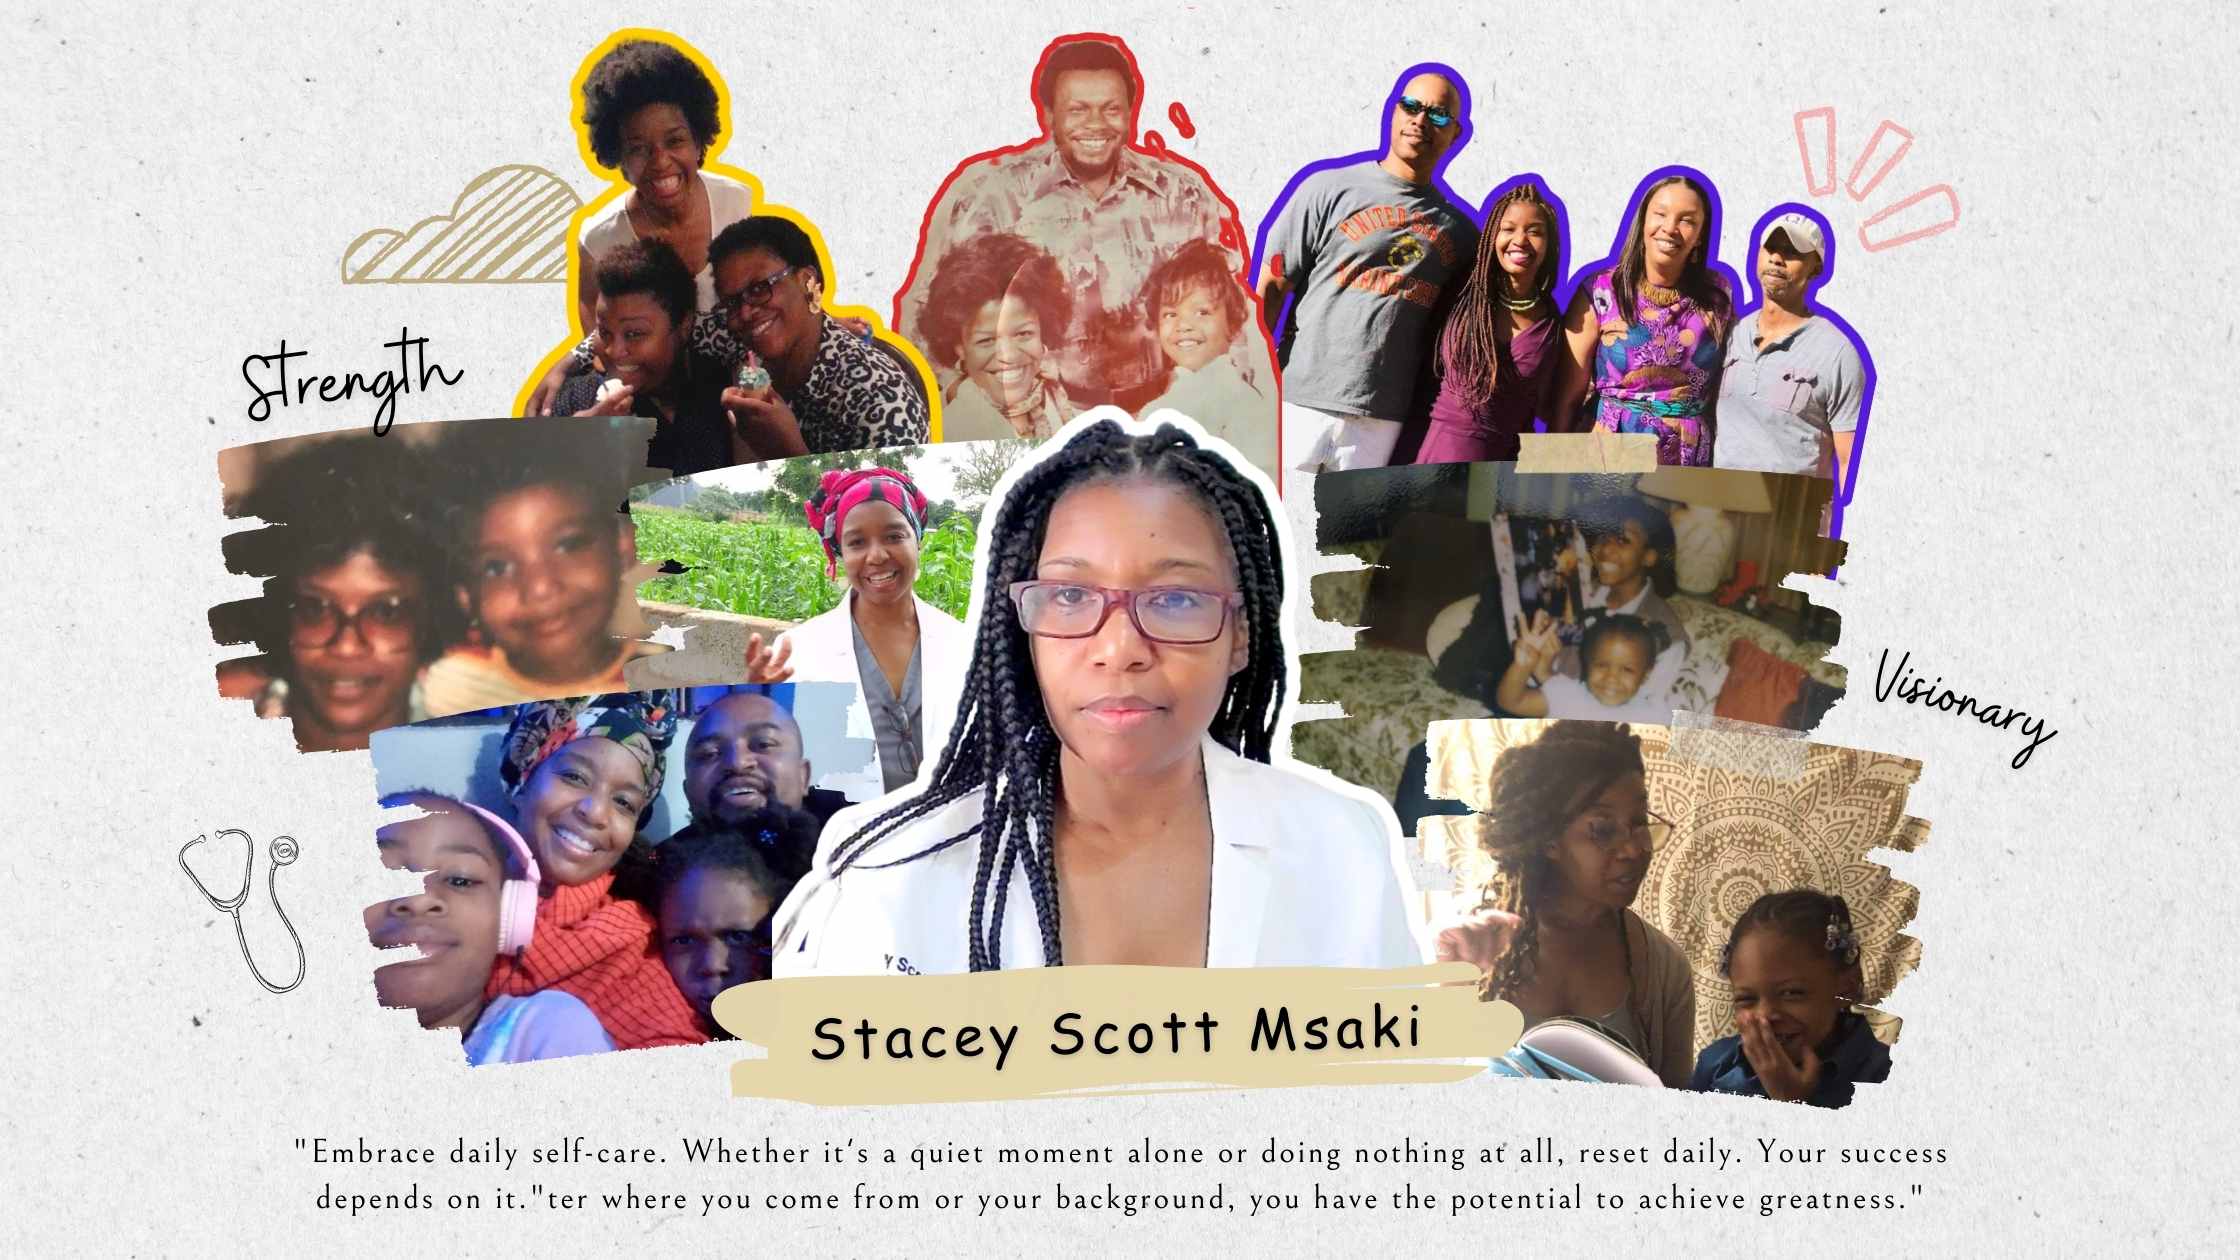 Pictures of Stacey Scott Msaki  from AIM Groups, Tanzania and her journey hospitality industry